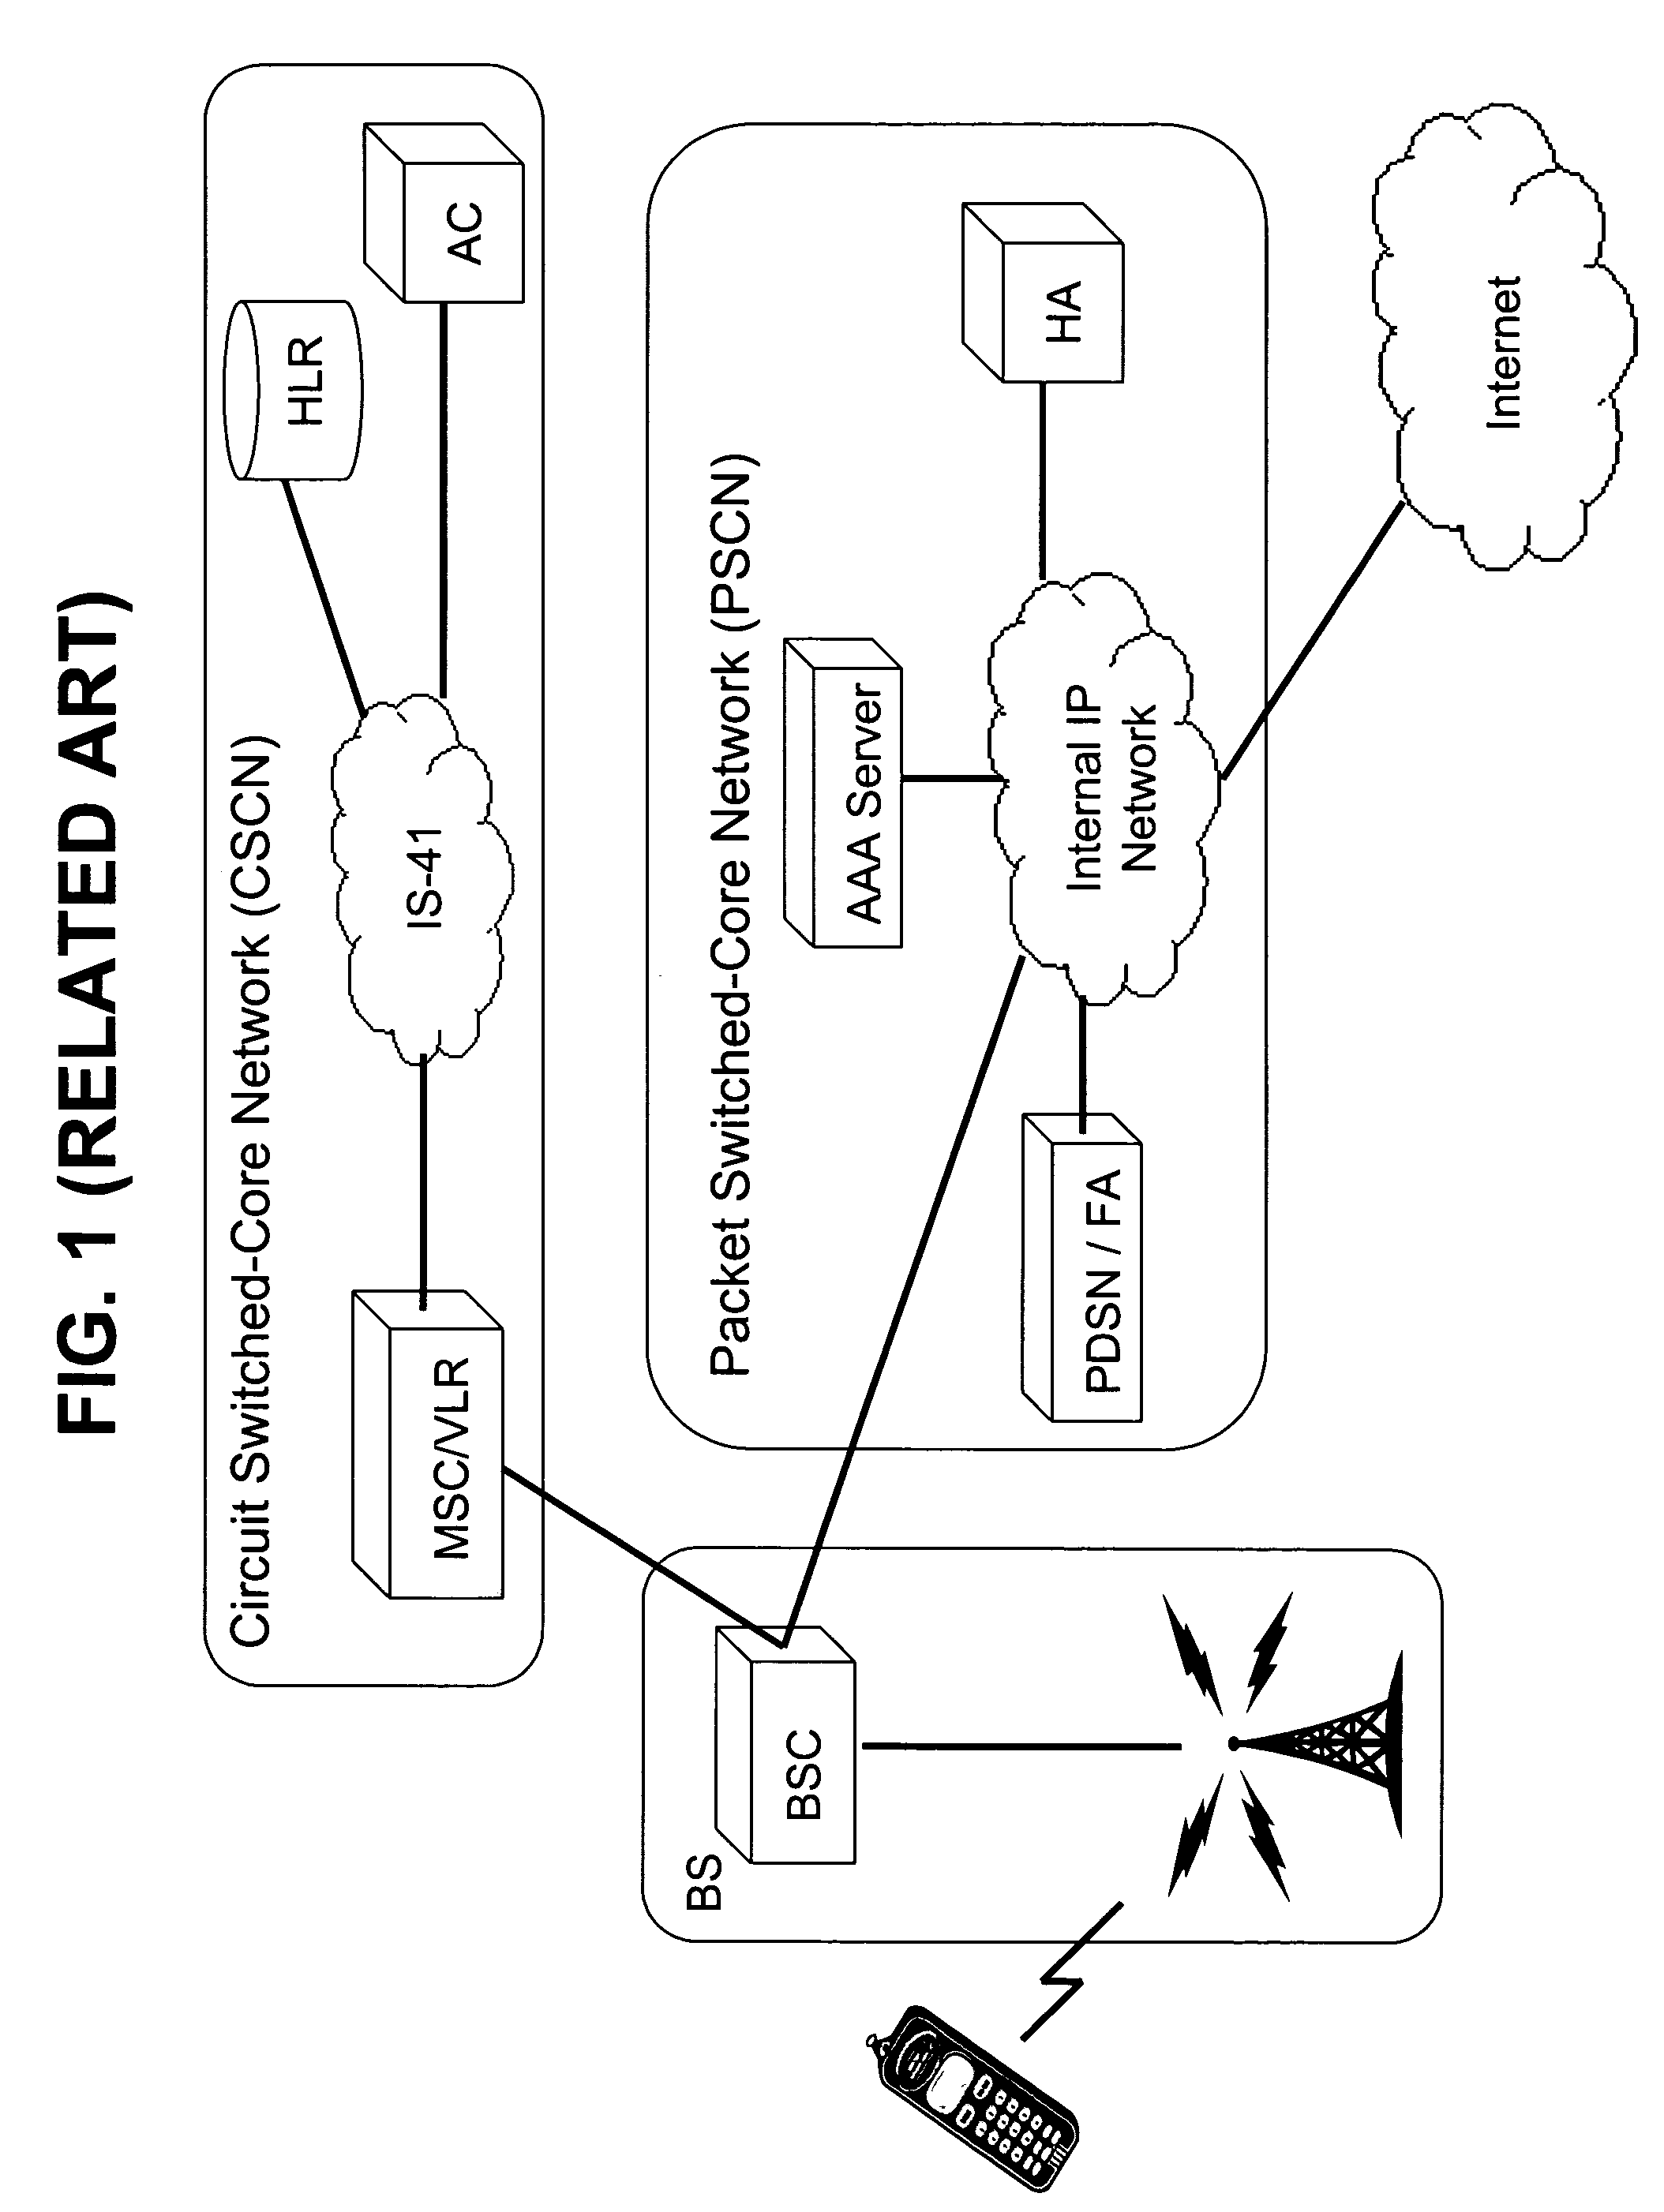 Mobile station identification system and method